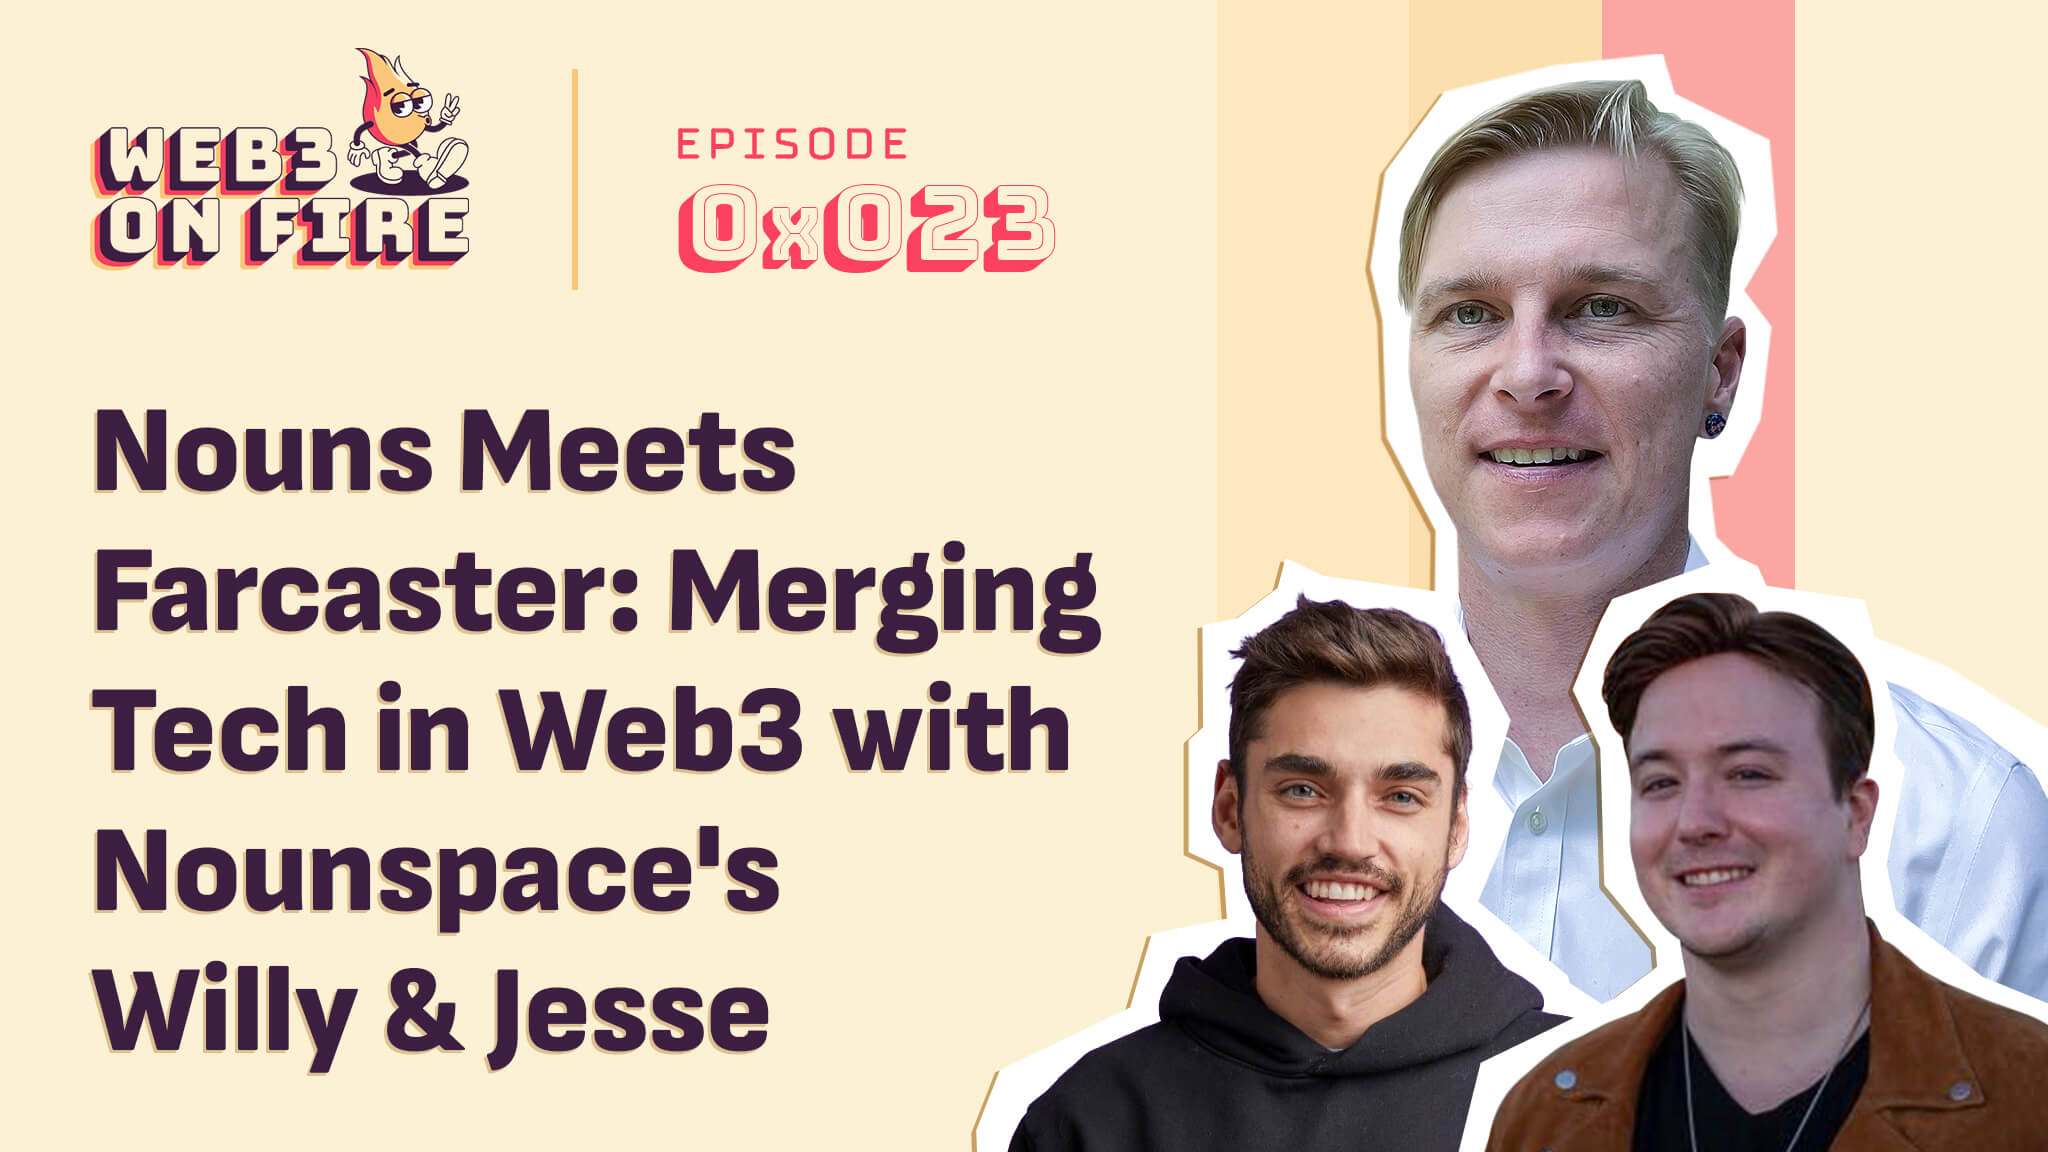 Nouns Meets Farcaster: Merging Tech in Web3 w/ Nounspace's Willy & Jesse